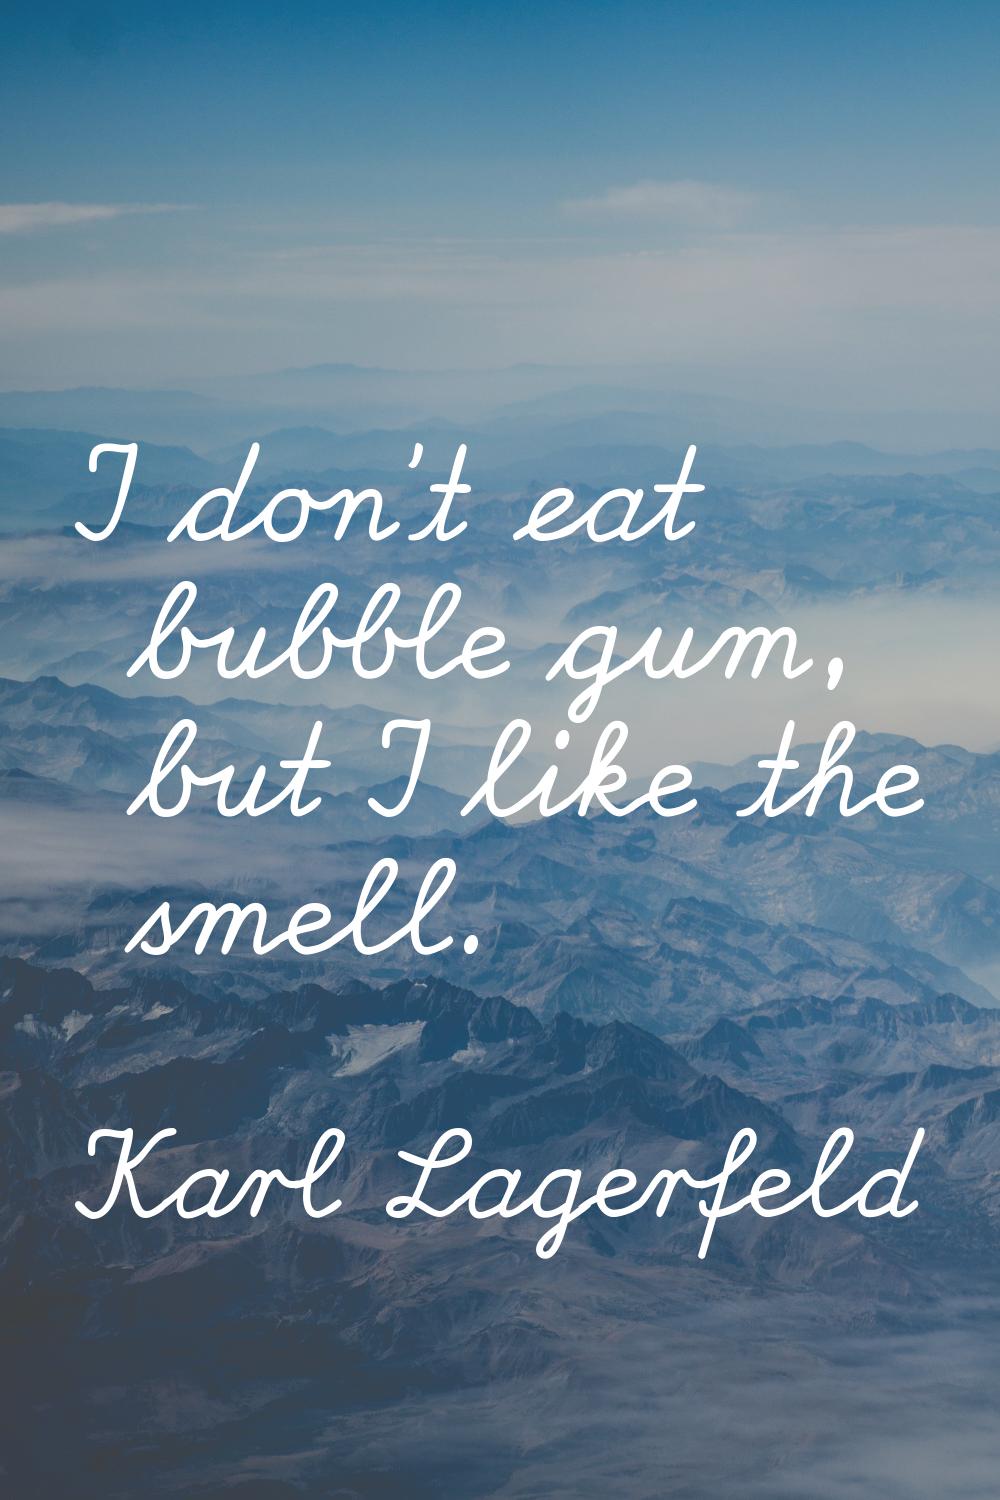 I don't eat bubble gum, but I like the smell.